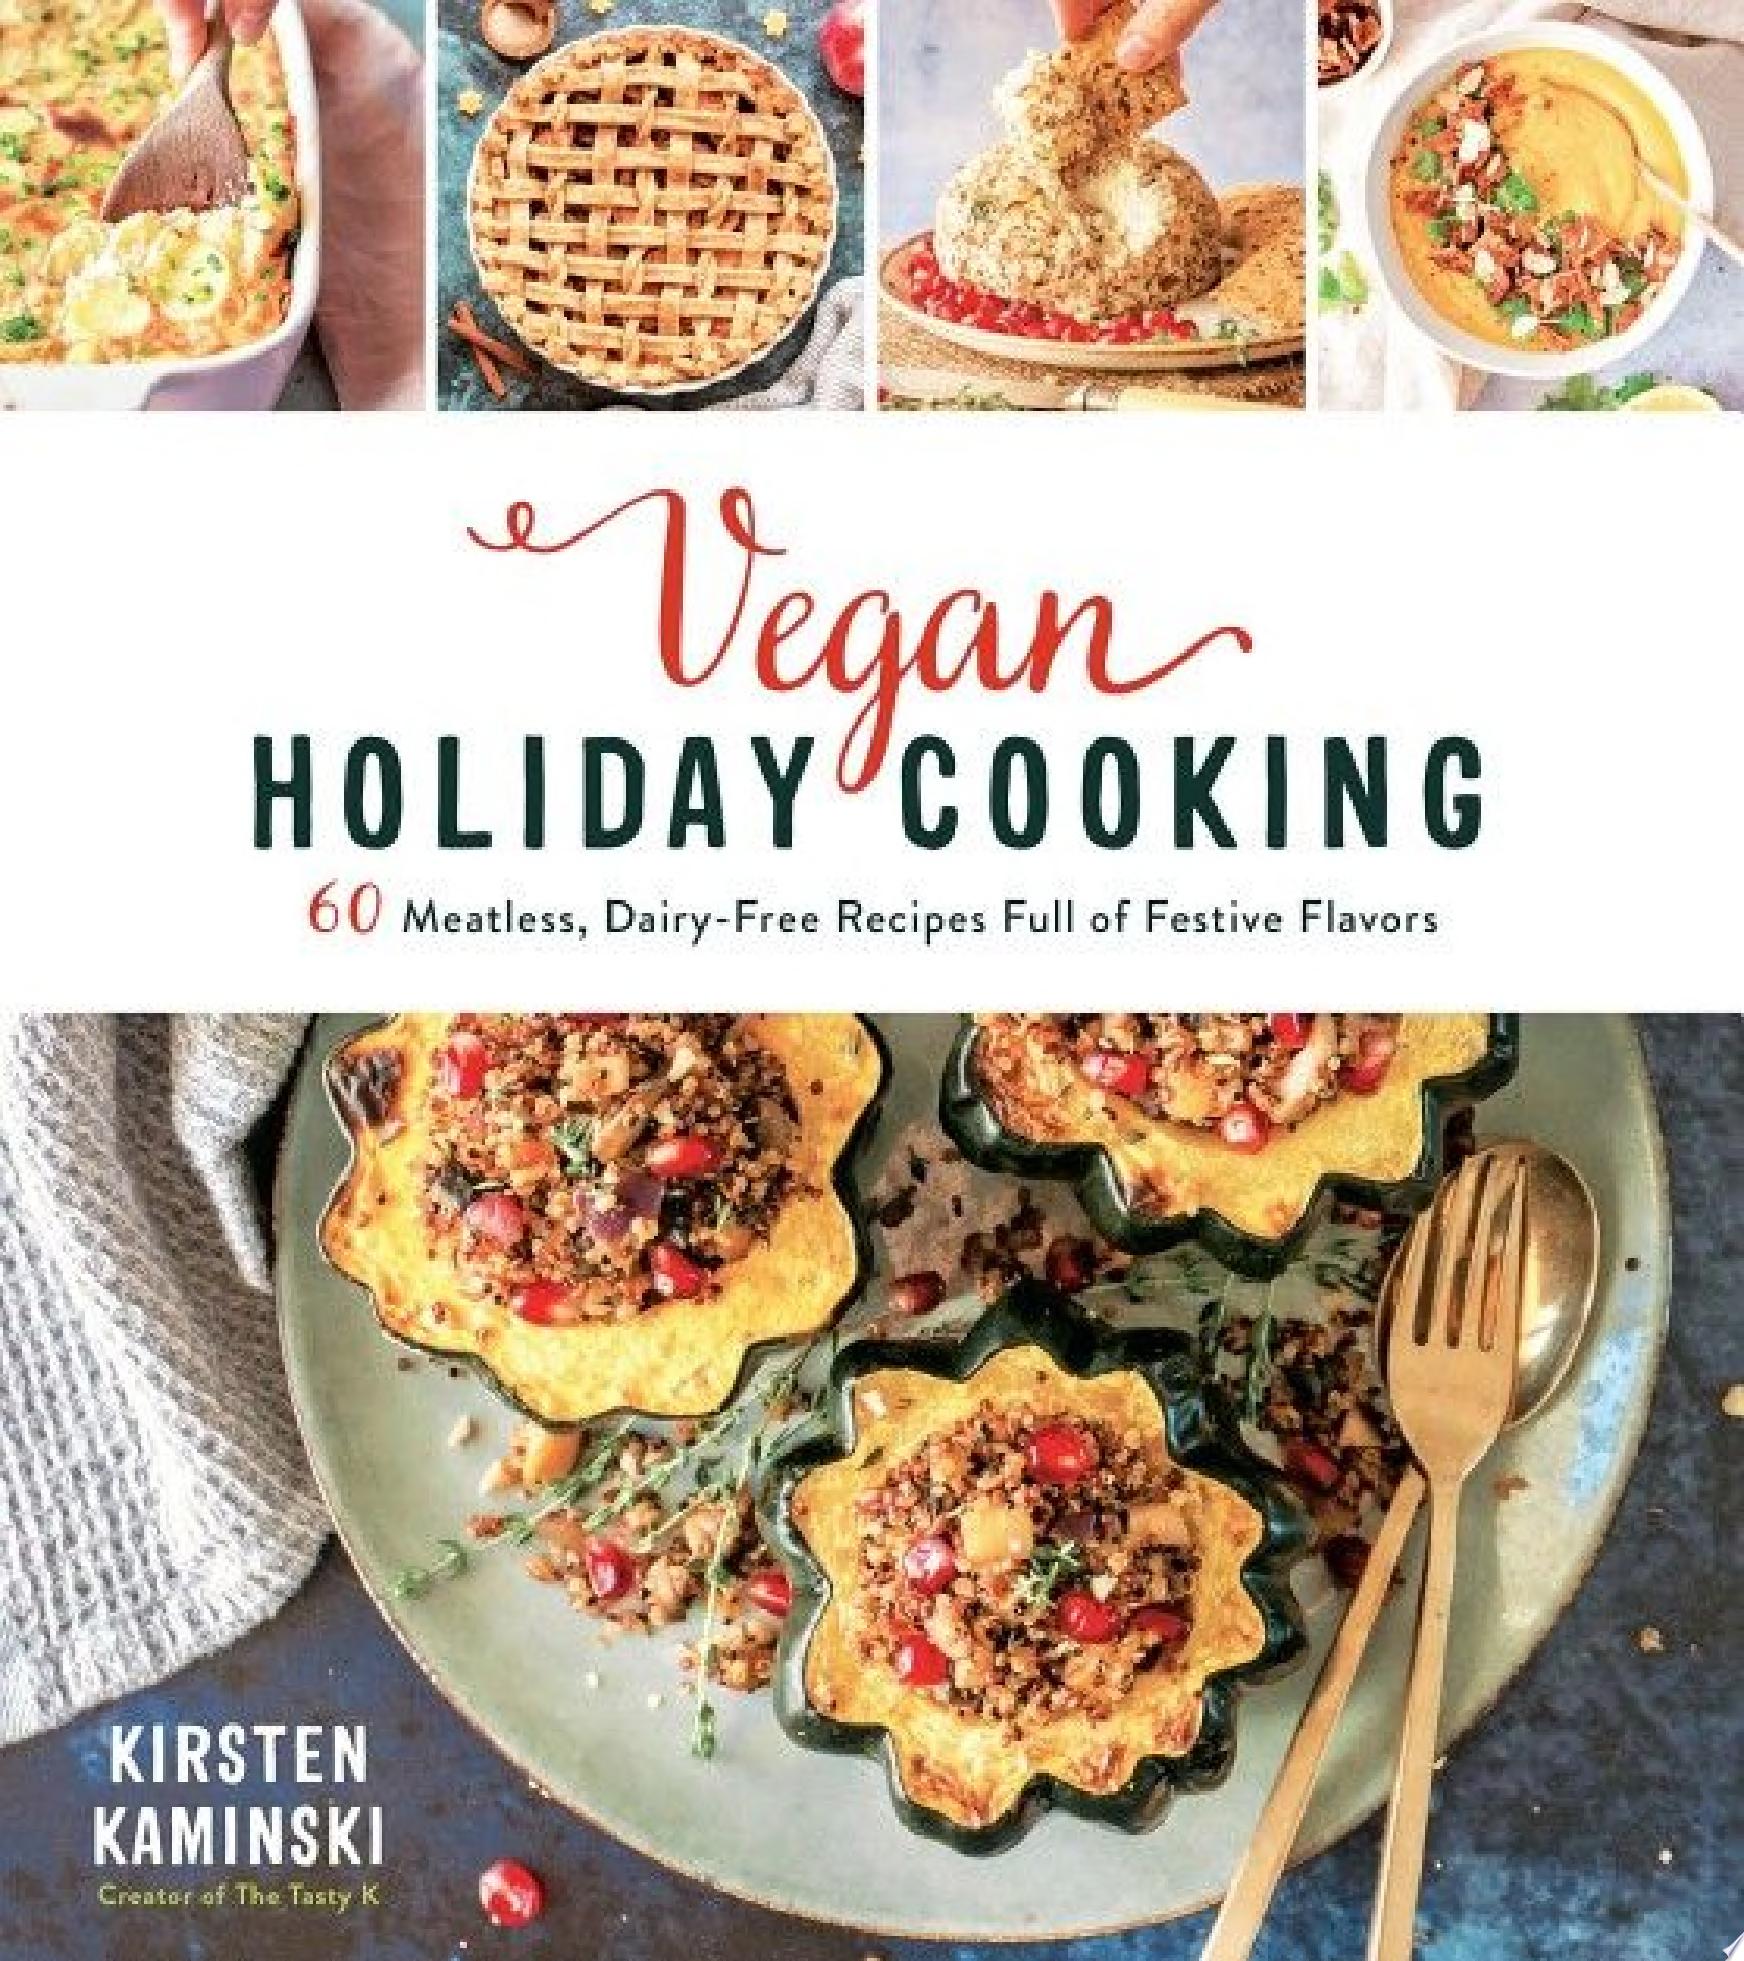 Image for "Vegan Holiday Cooking"